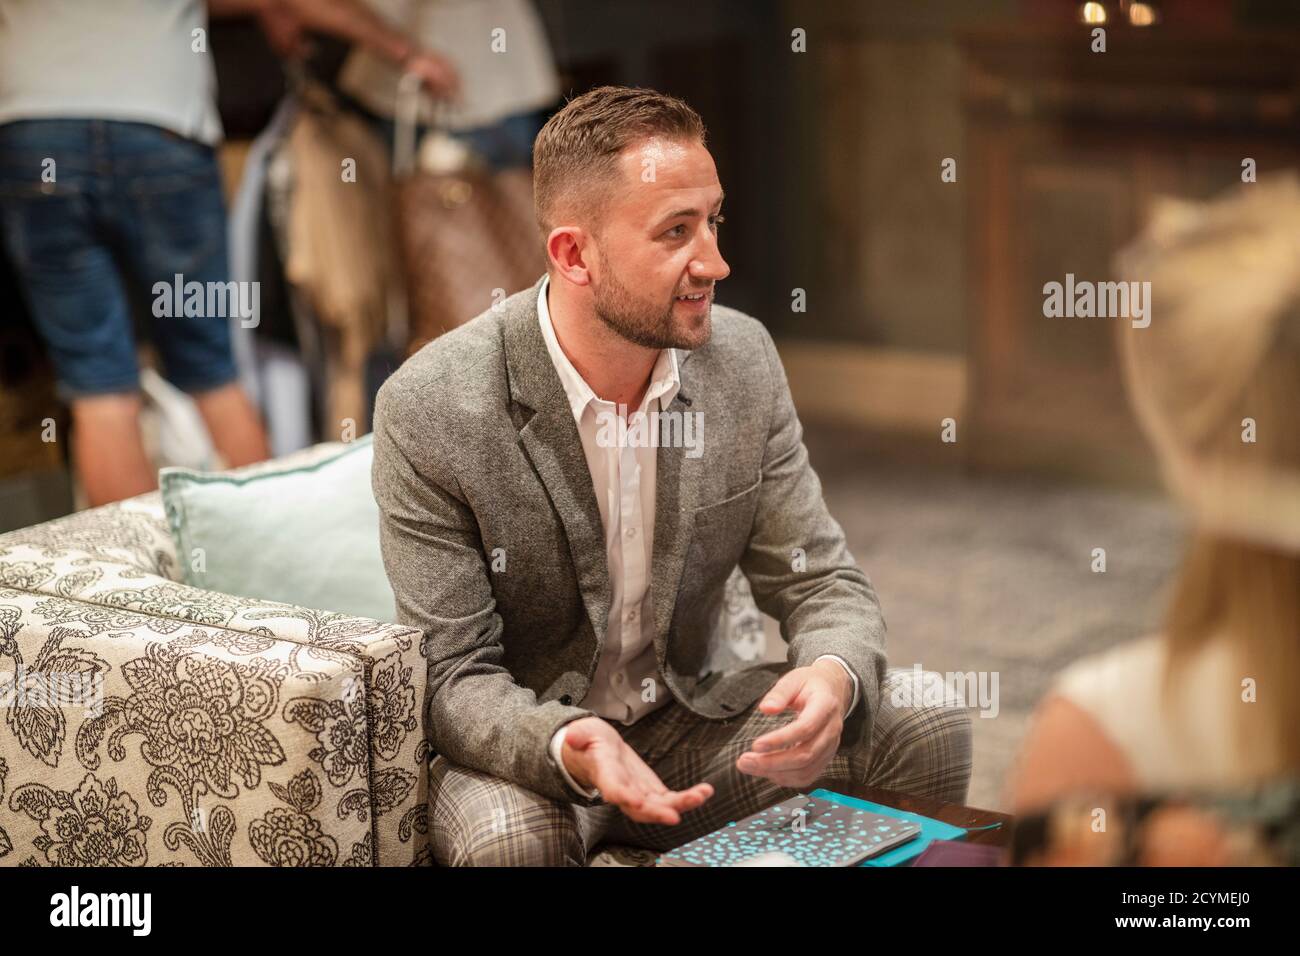 A shot of a businessman wearing smart clothing sitting in a lobby, he is talking business. Stock Photo